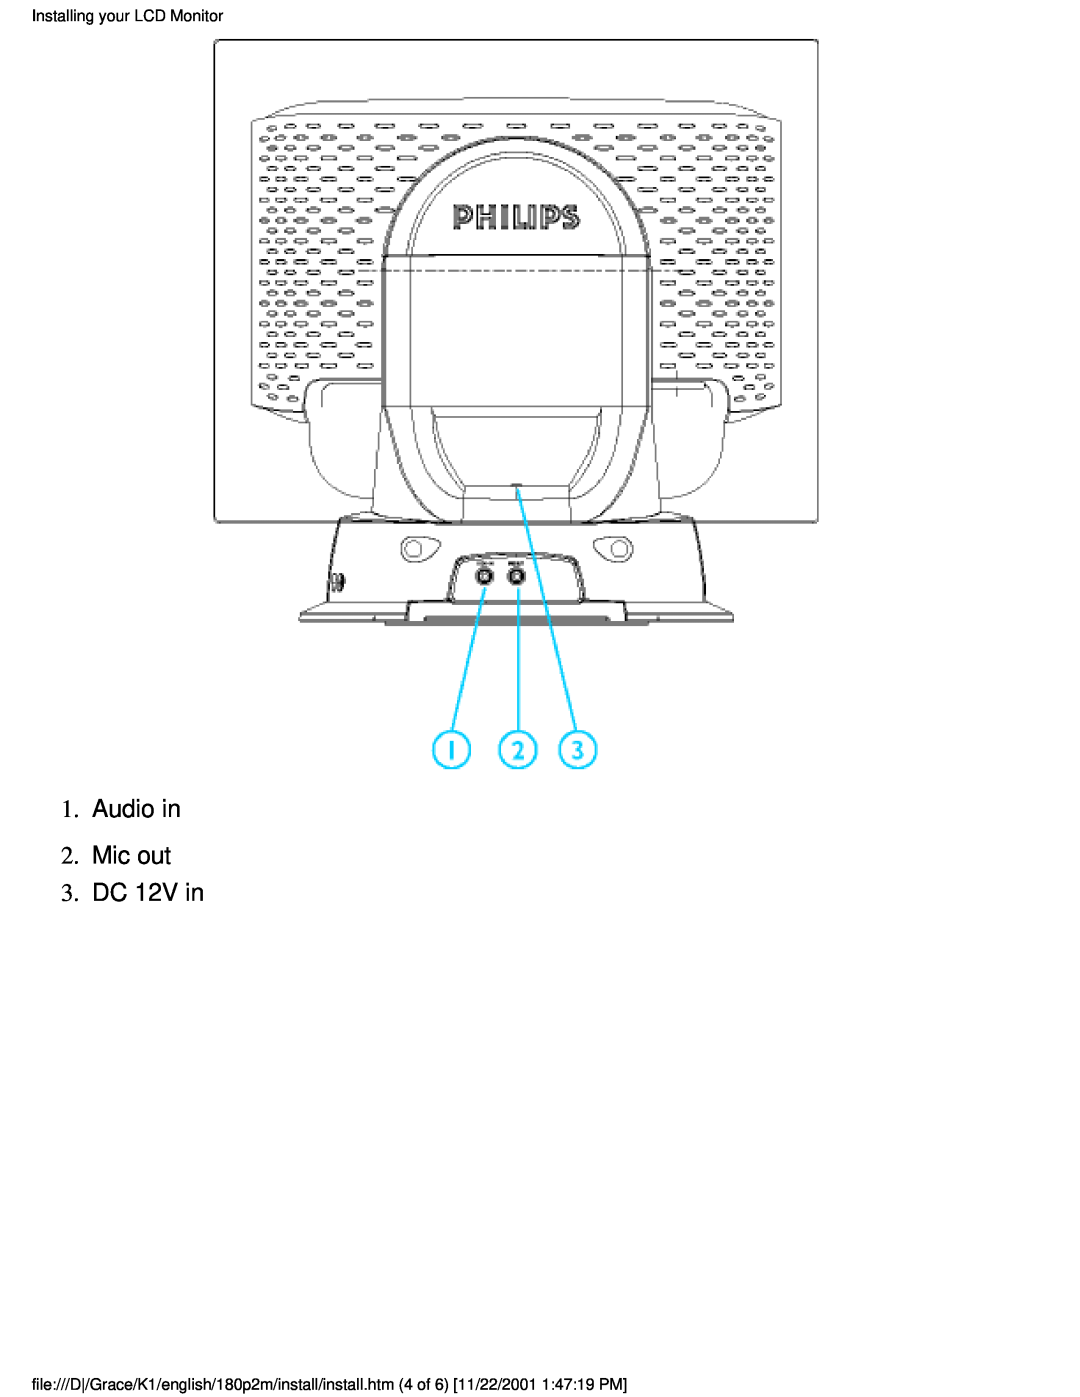 Philips 180P2M user manual Audio in 2. Mic out 3. DC 12V in, Installing your LCD Monitor 